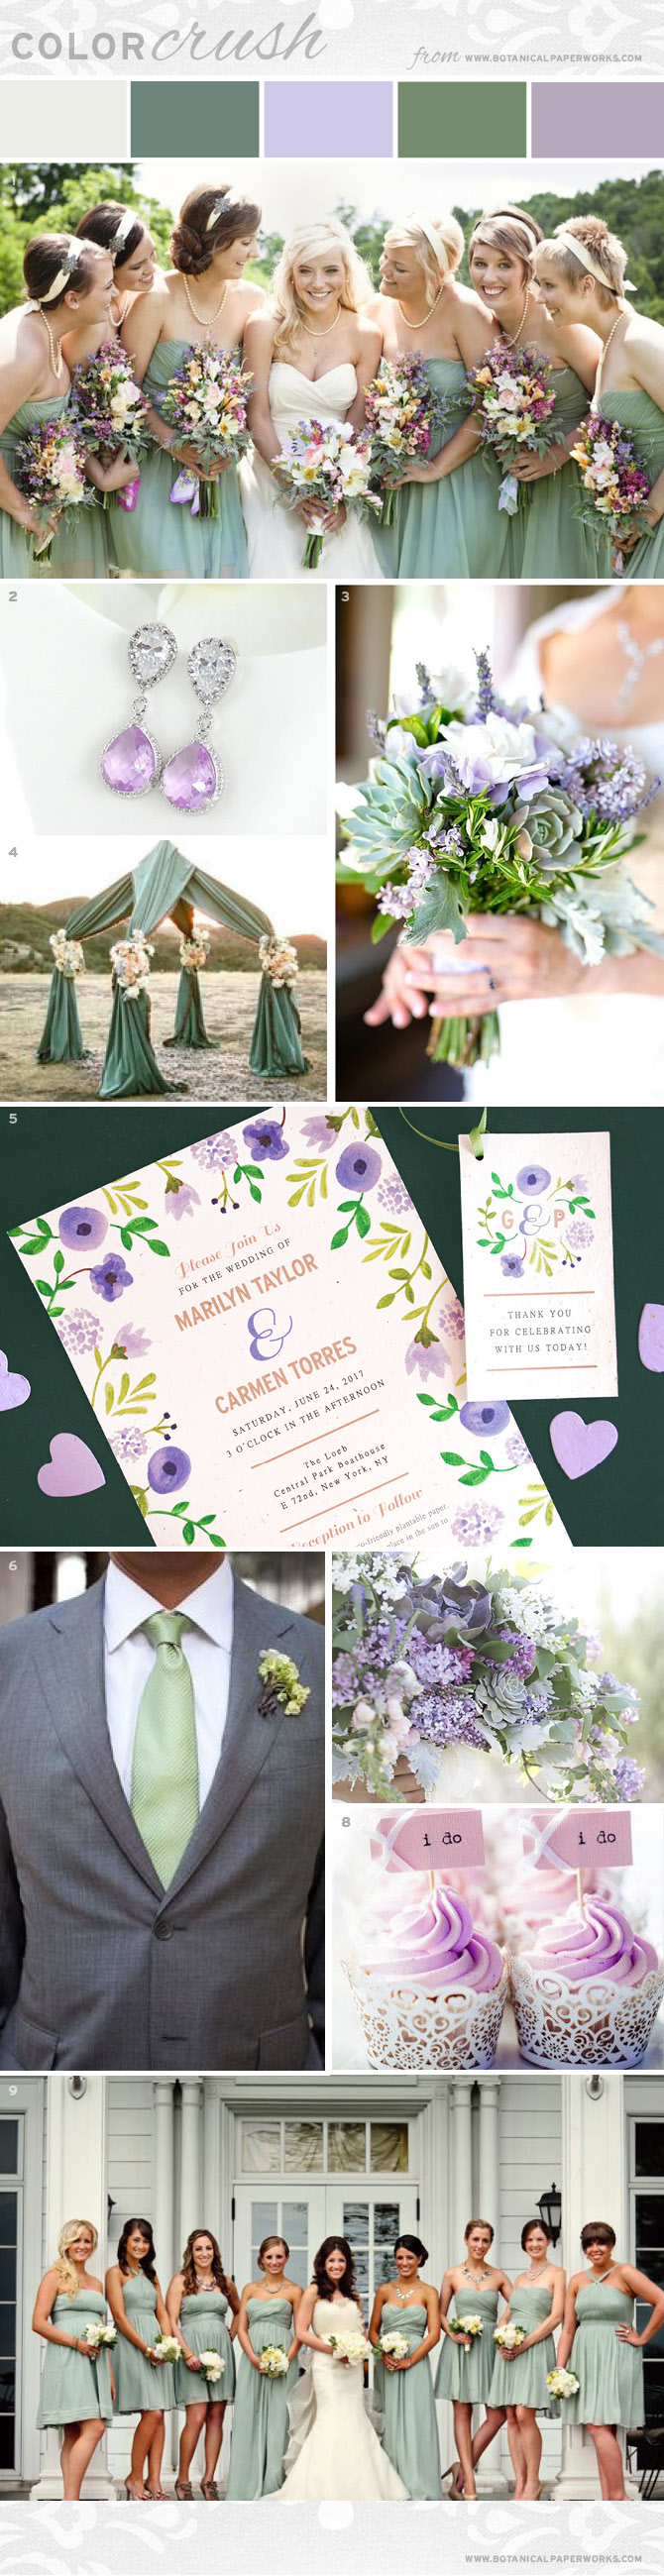 Elegant and wildly pretty, the combination of rustic sage, playful lilac and crisp white makes this #wedding inspiration board a swoon-worthy summer & #autumn palette!